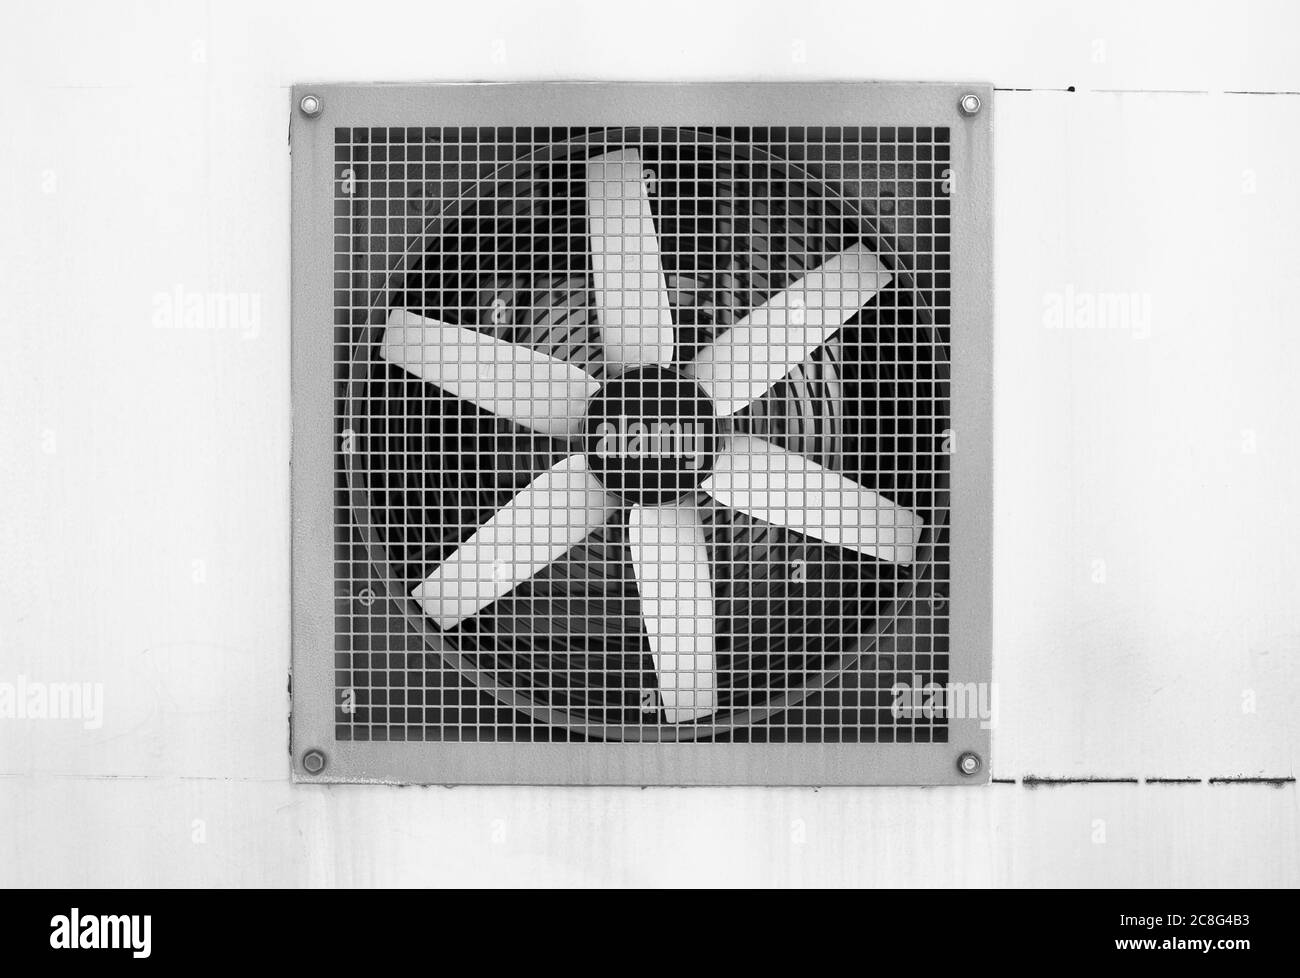 Ventilator behind grid. Device for regulation of heat and wind. Blades of ventilation system are white. Black and white shot Stock Photo